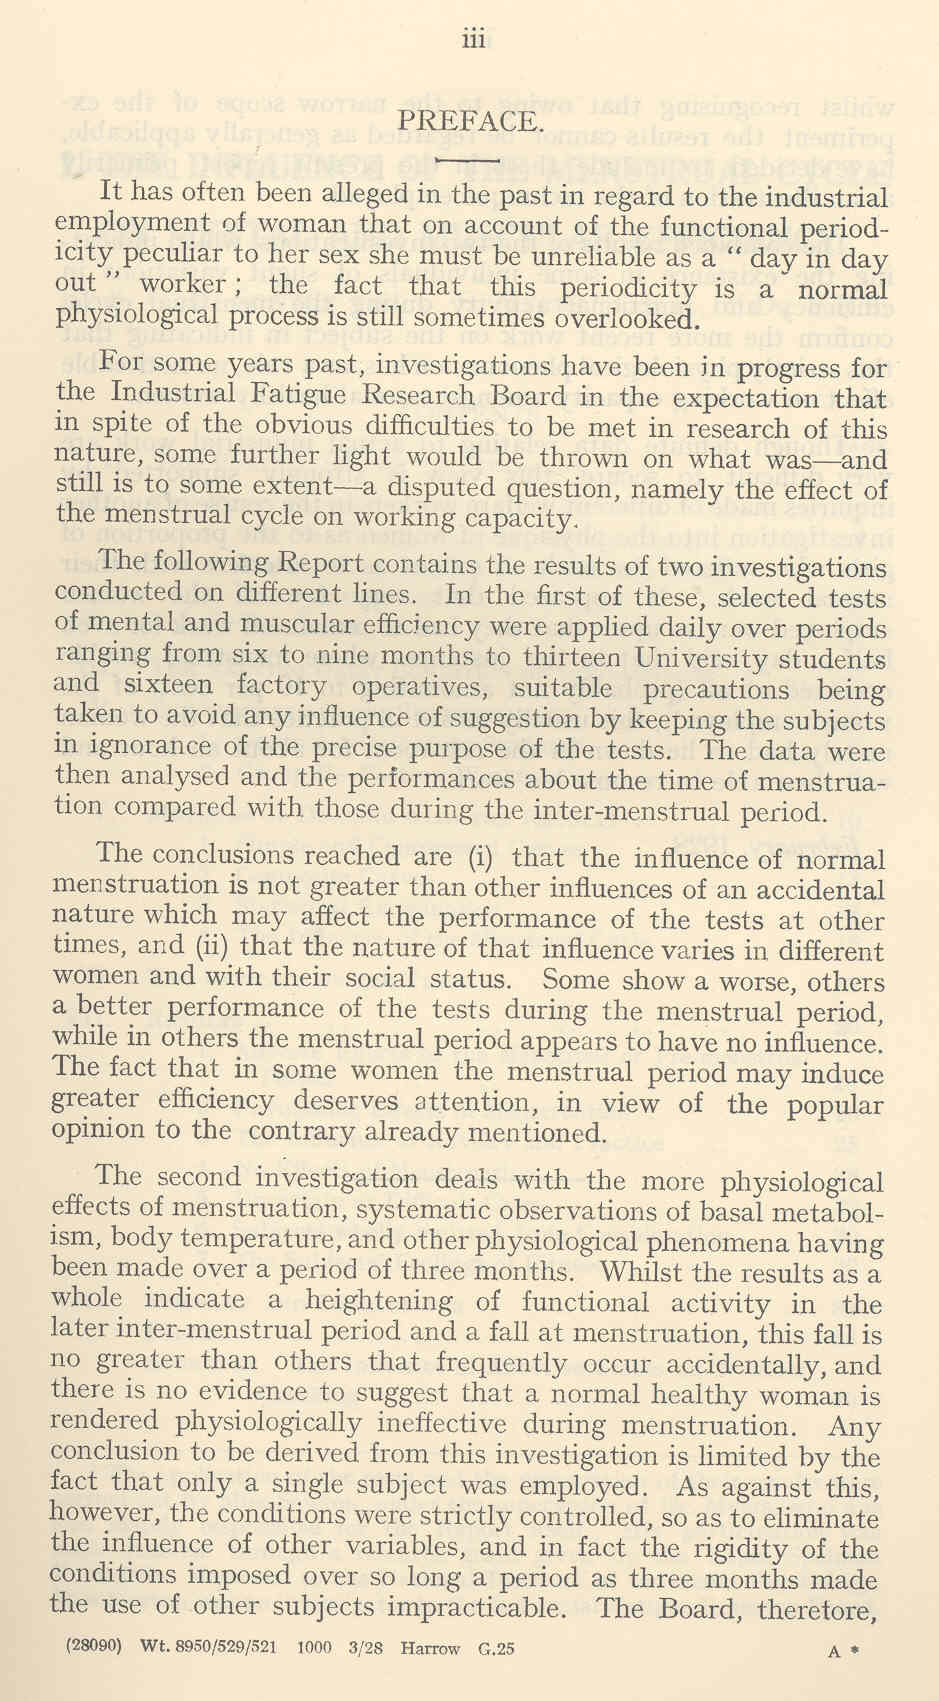 Report of the Medical Research Council Industrial Fatigue Research Board, 1928